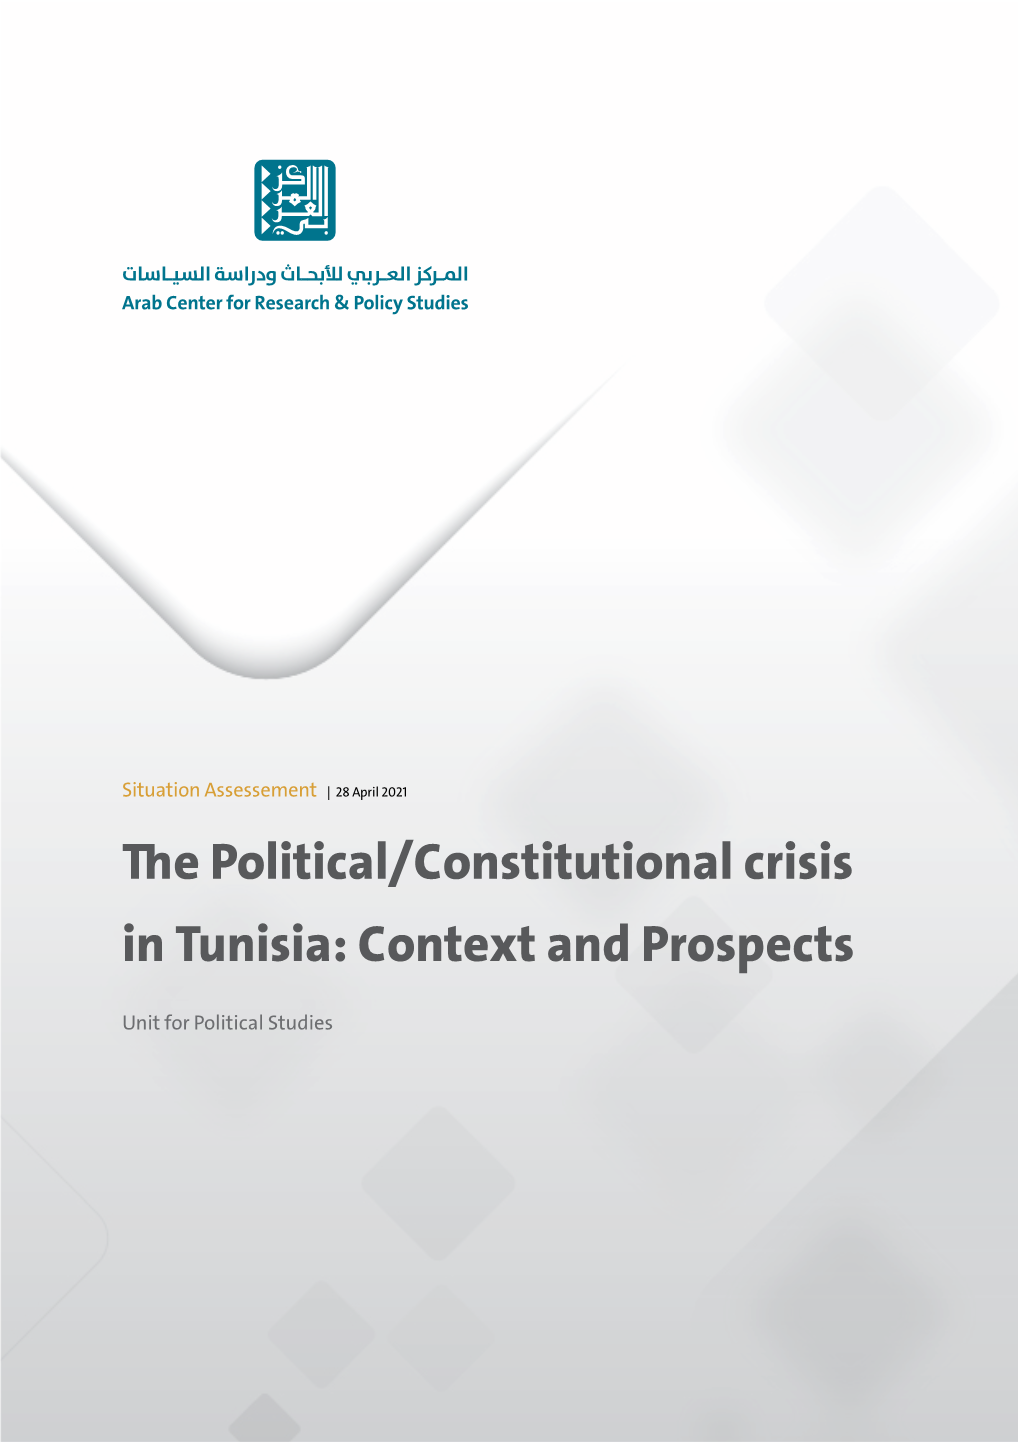 The Political/Constitutional Crisis in Tunisia: Context and Prospects